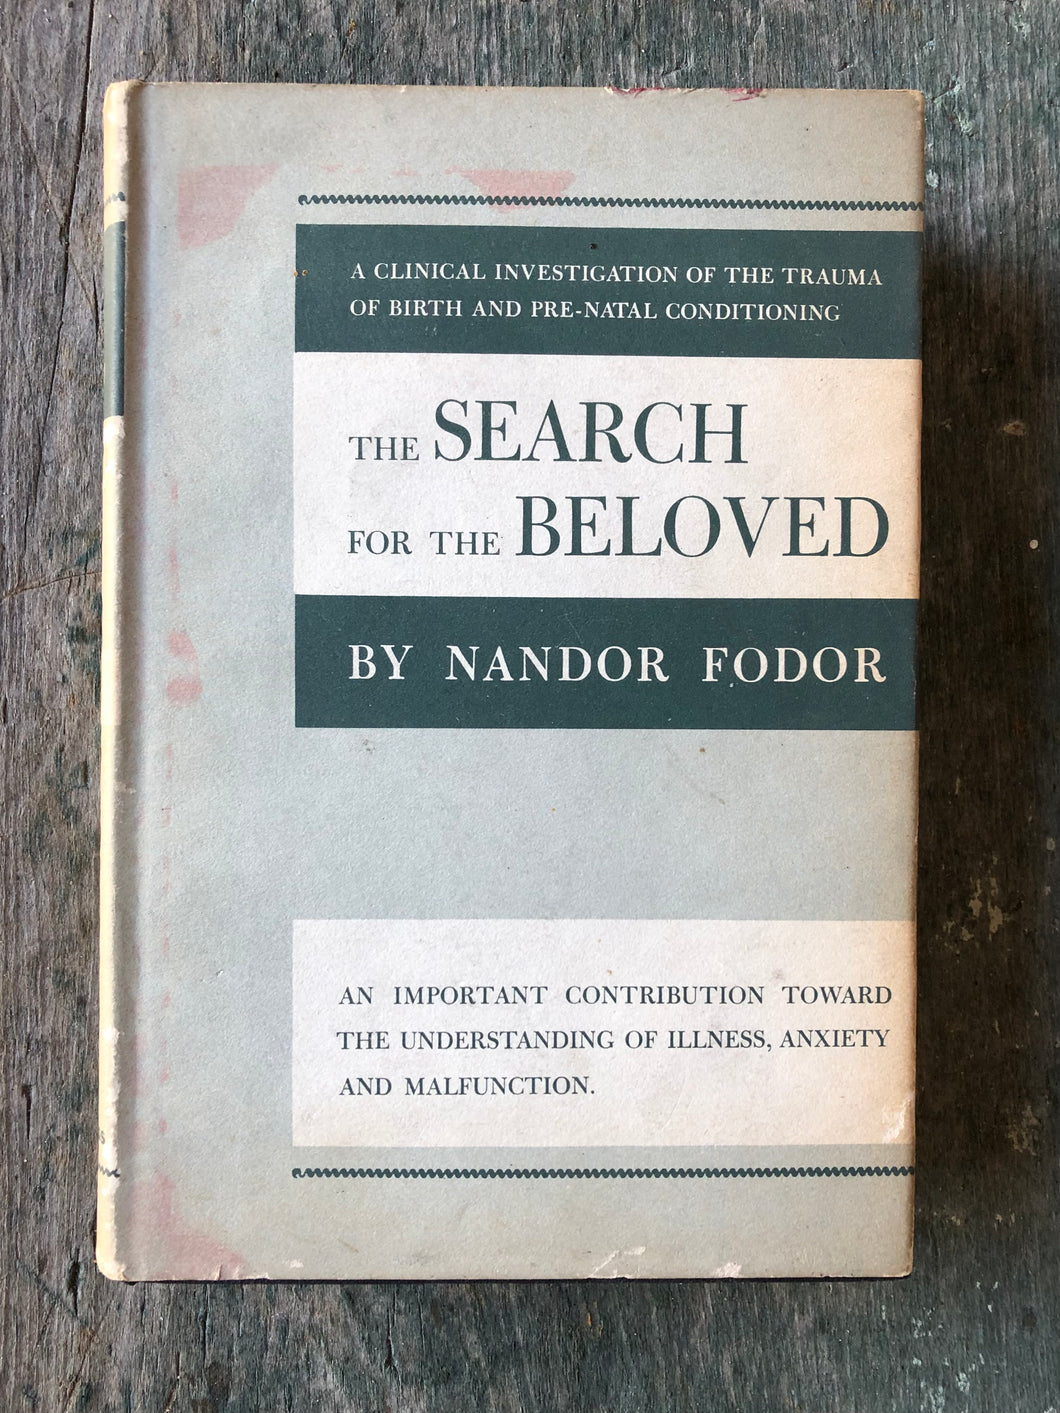 The Search for the Beloved: A Clinical Investigation of the Trauma of Birth and Pre-Natal Conditions by Nandor Fodor